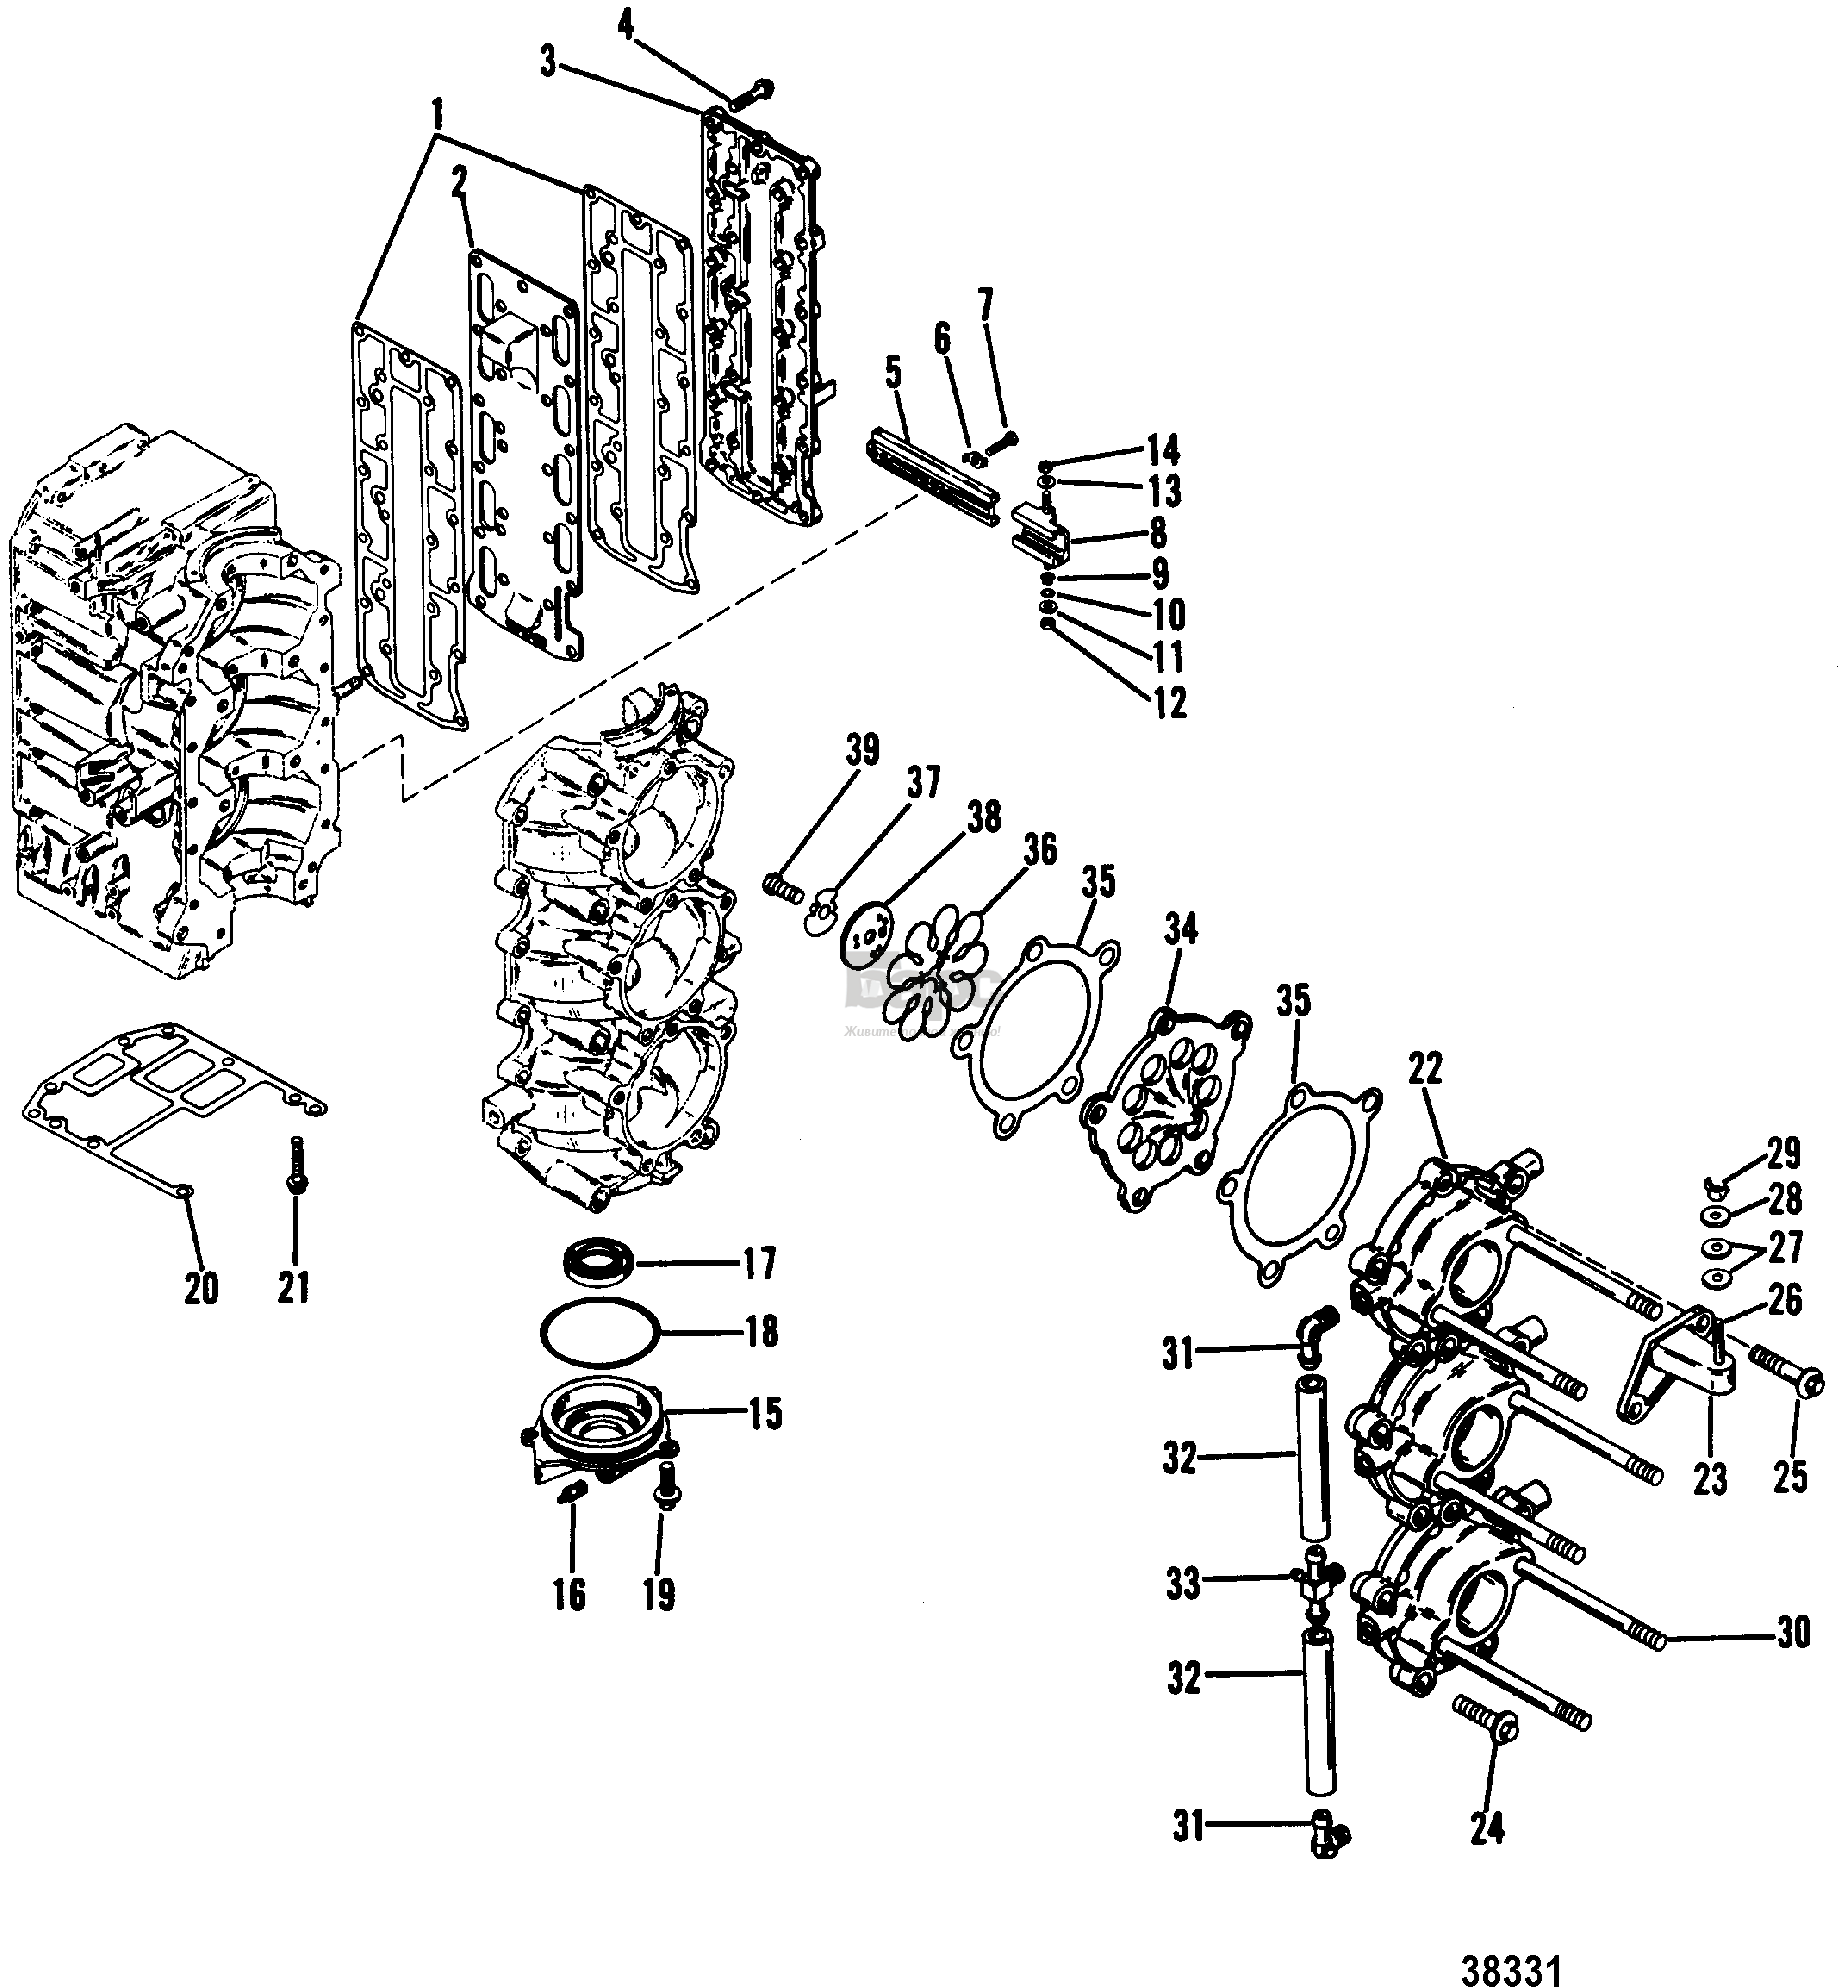 INDUCTION MANIFOLD AND REED BLOCK